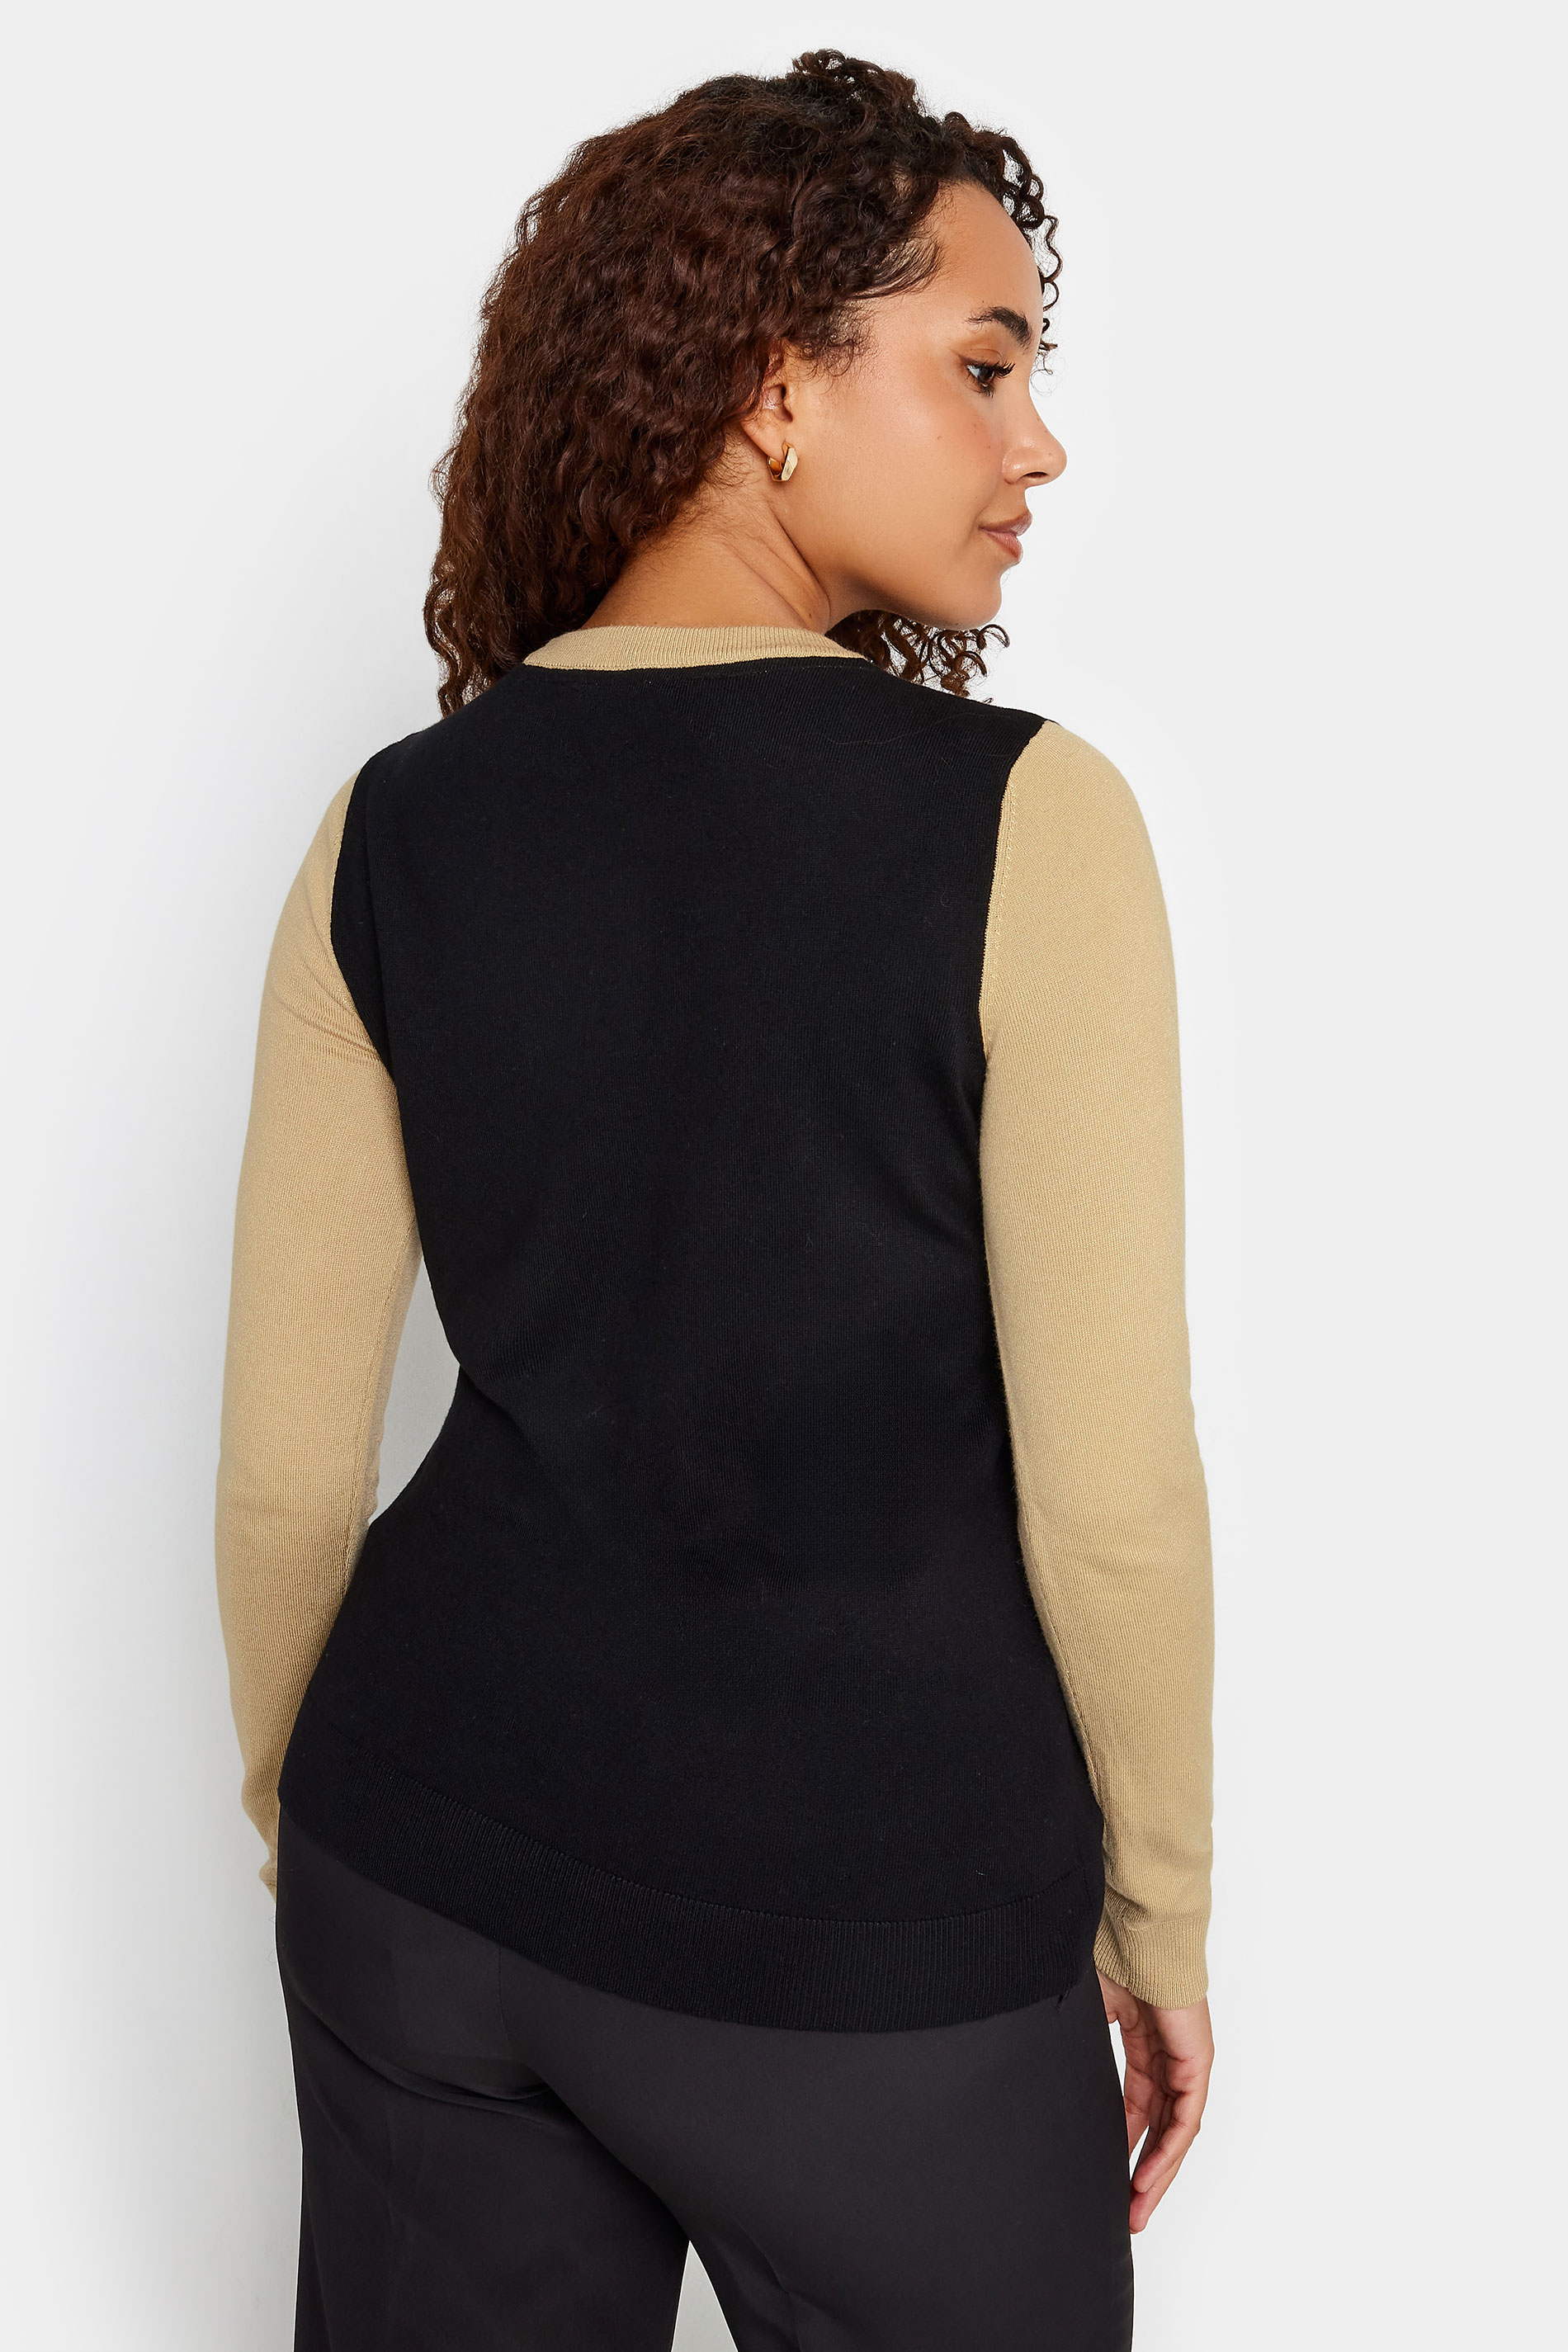 M&Co Neutral Brown Colourblock Knitted Jumper | M&Co 3